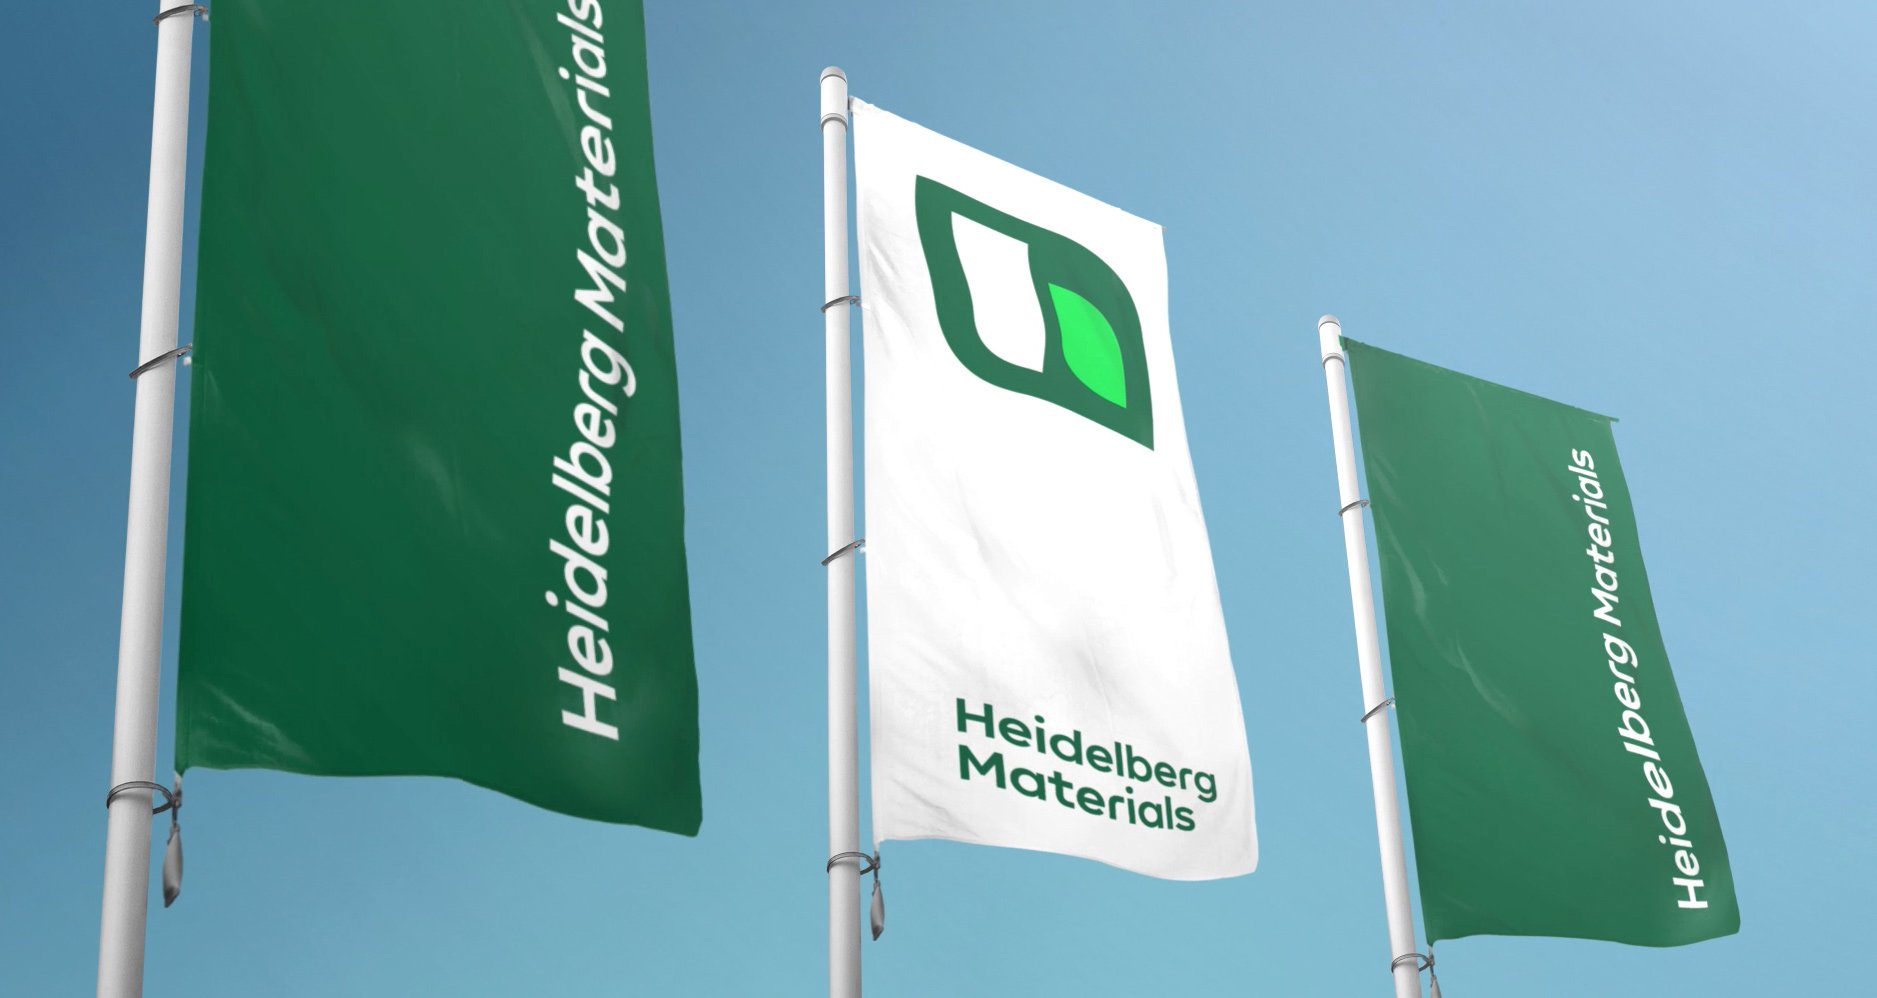 Three flags in the wind with the Heidelberg Materials logo on them